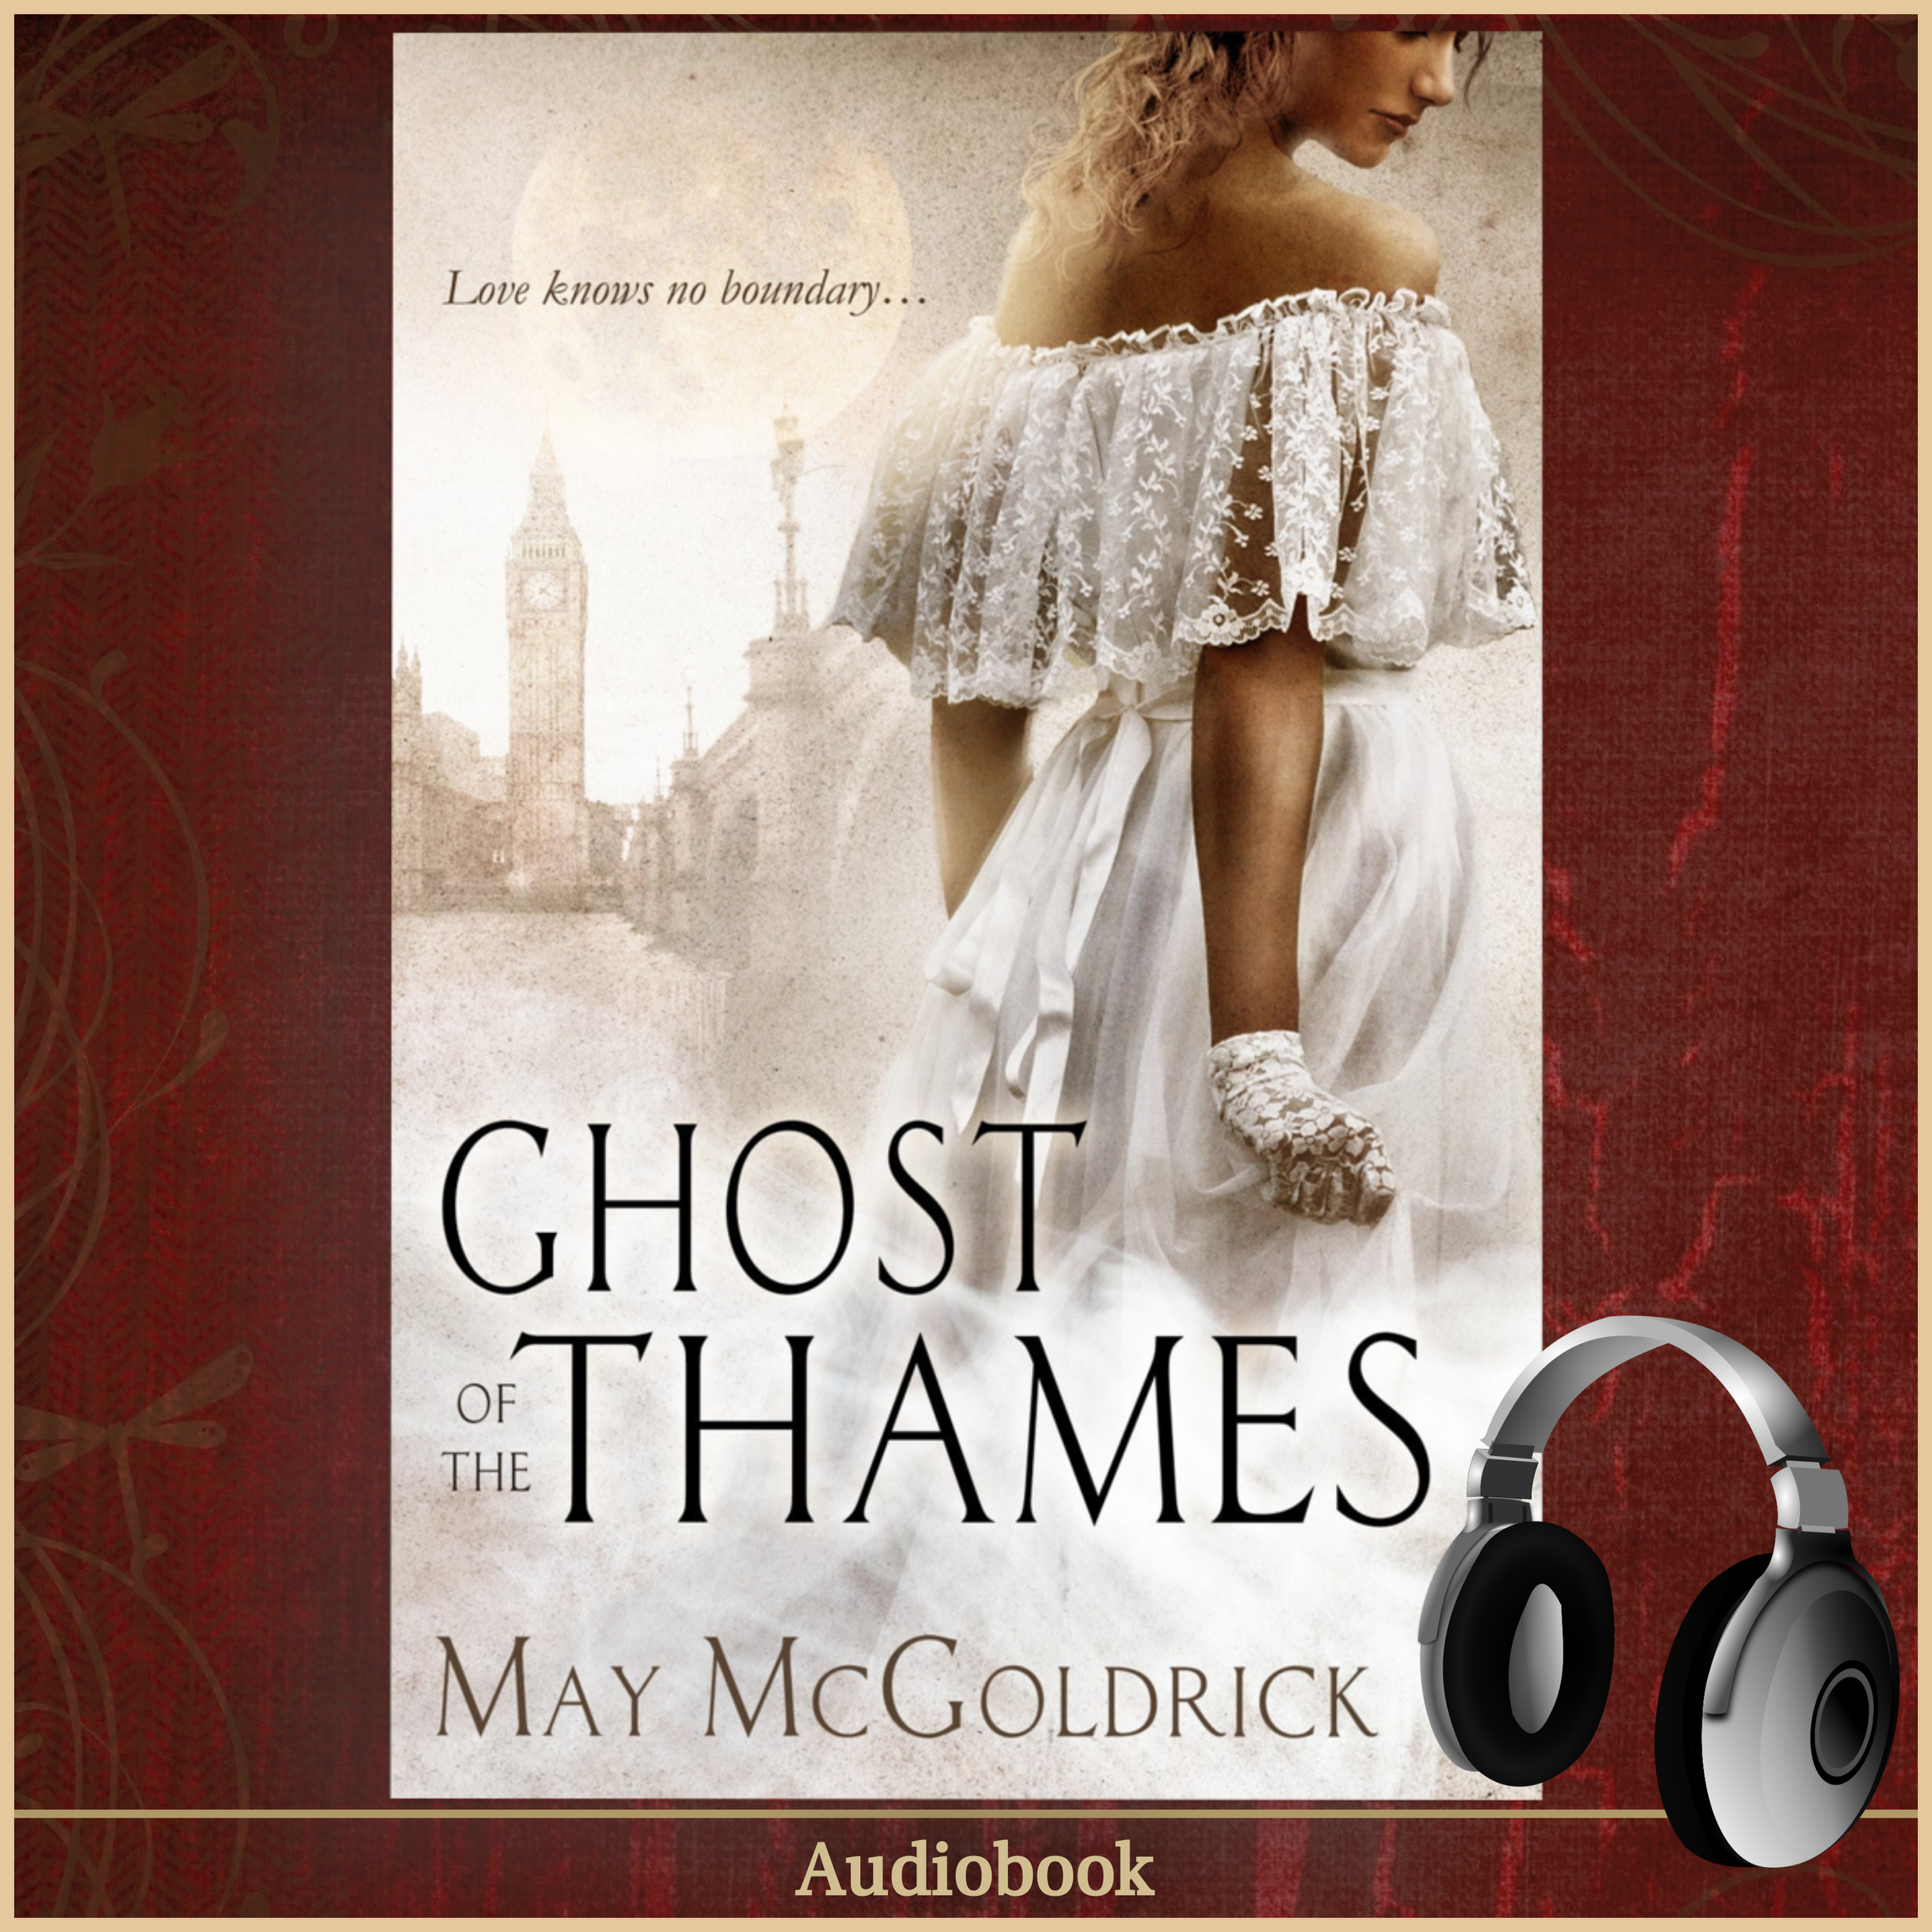 ghost of the thames audiobook.png